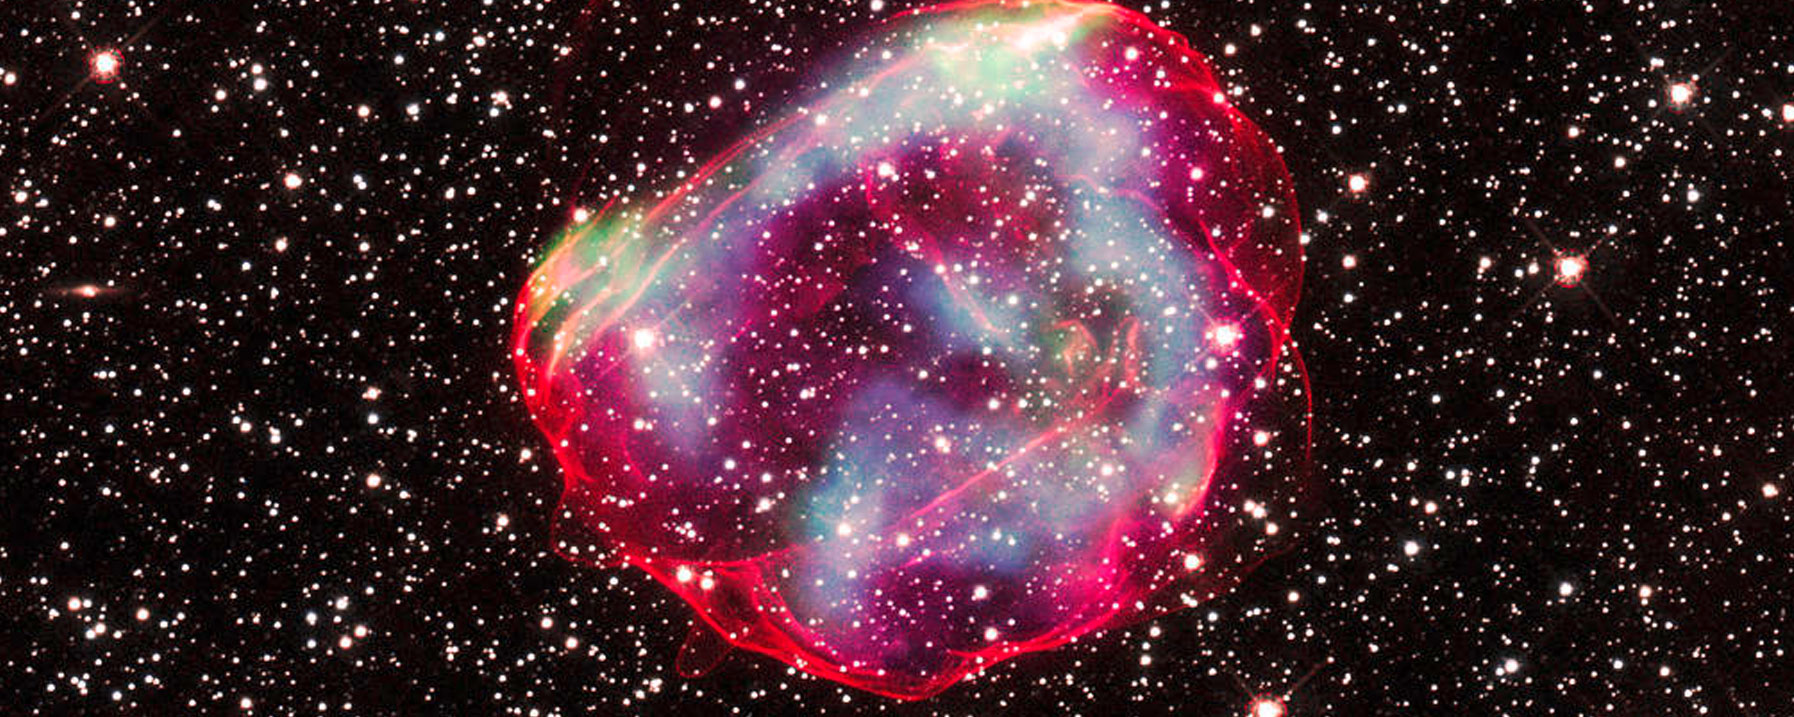 The supernova remnant called SNR 0519-69.0 (SNR 0519 for short) is the debris from an explosion of a white dwarf star. Optical data shows the perimeter of the remnant in red and stars around the remnant in white.